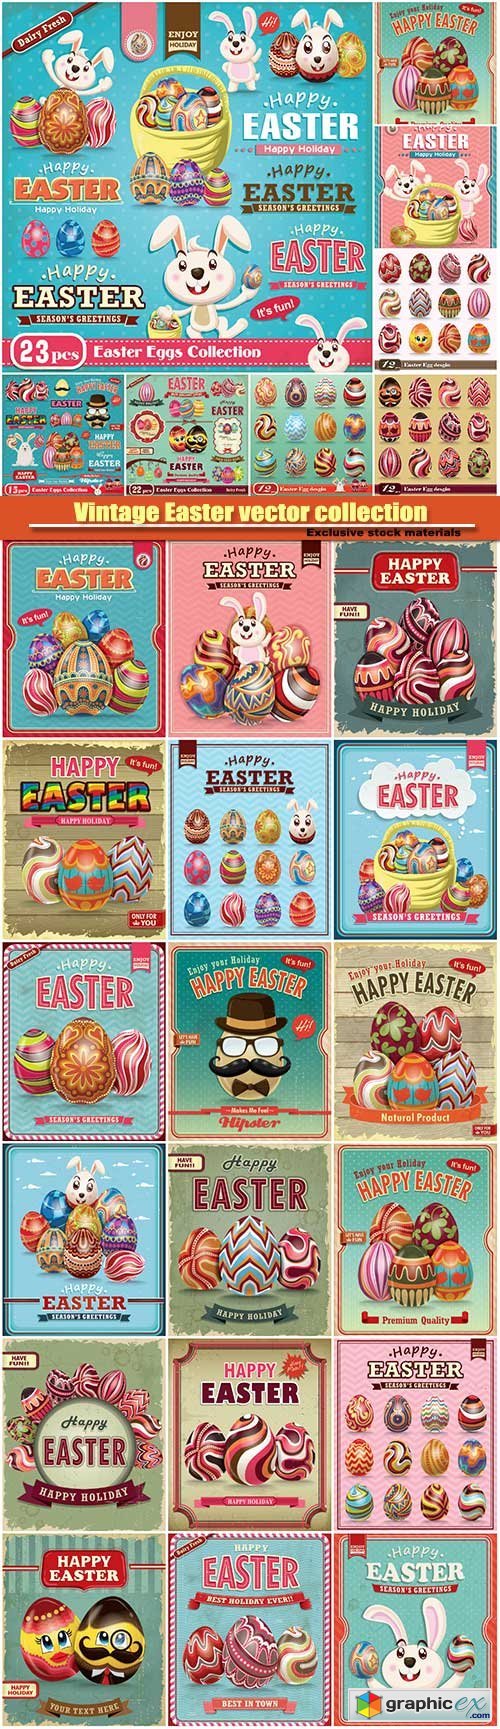 Vintage Easter vector collection